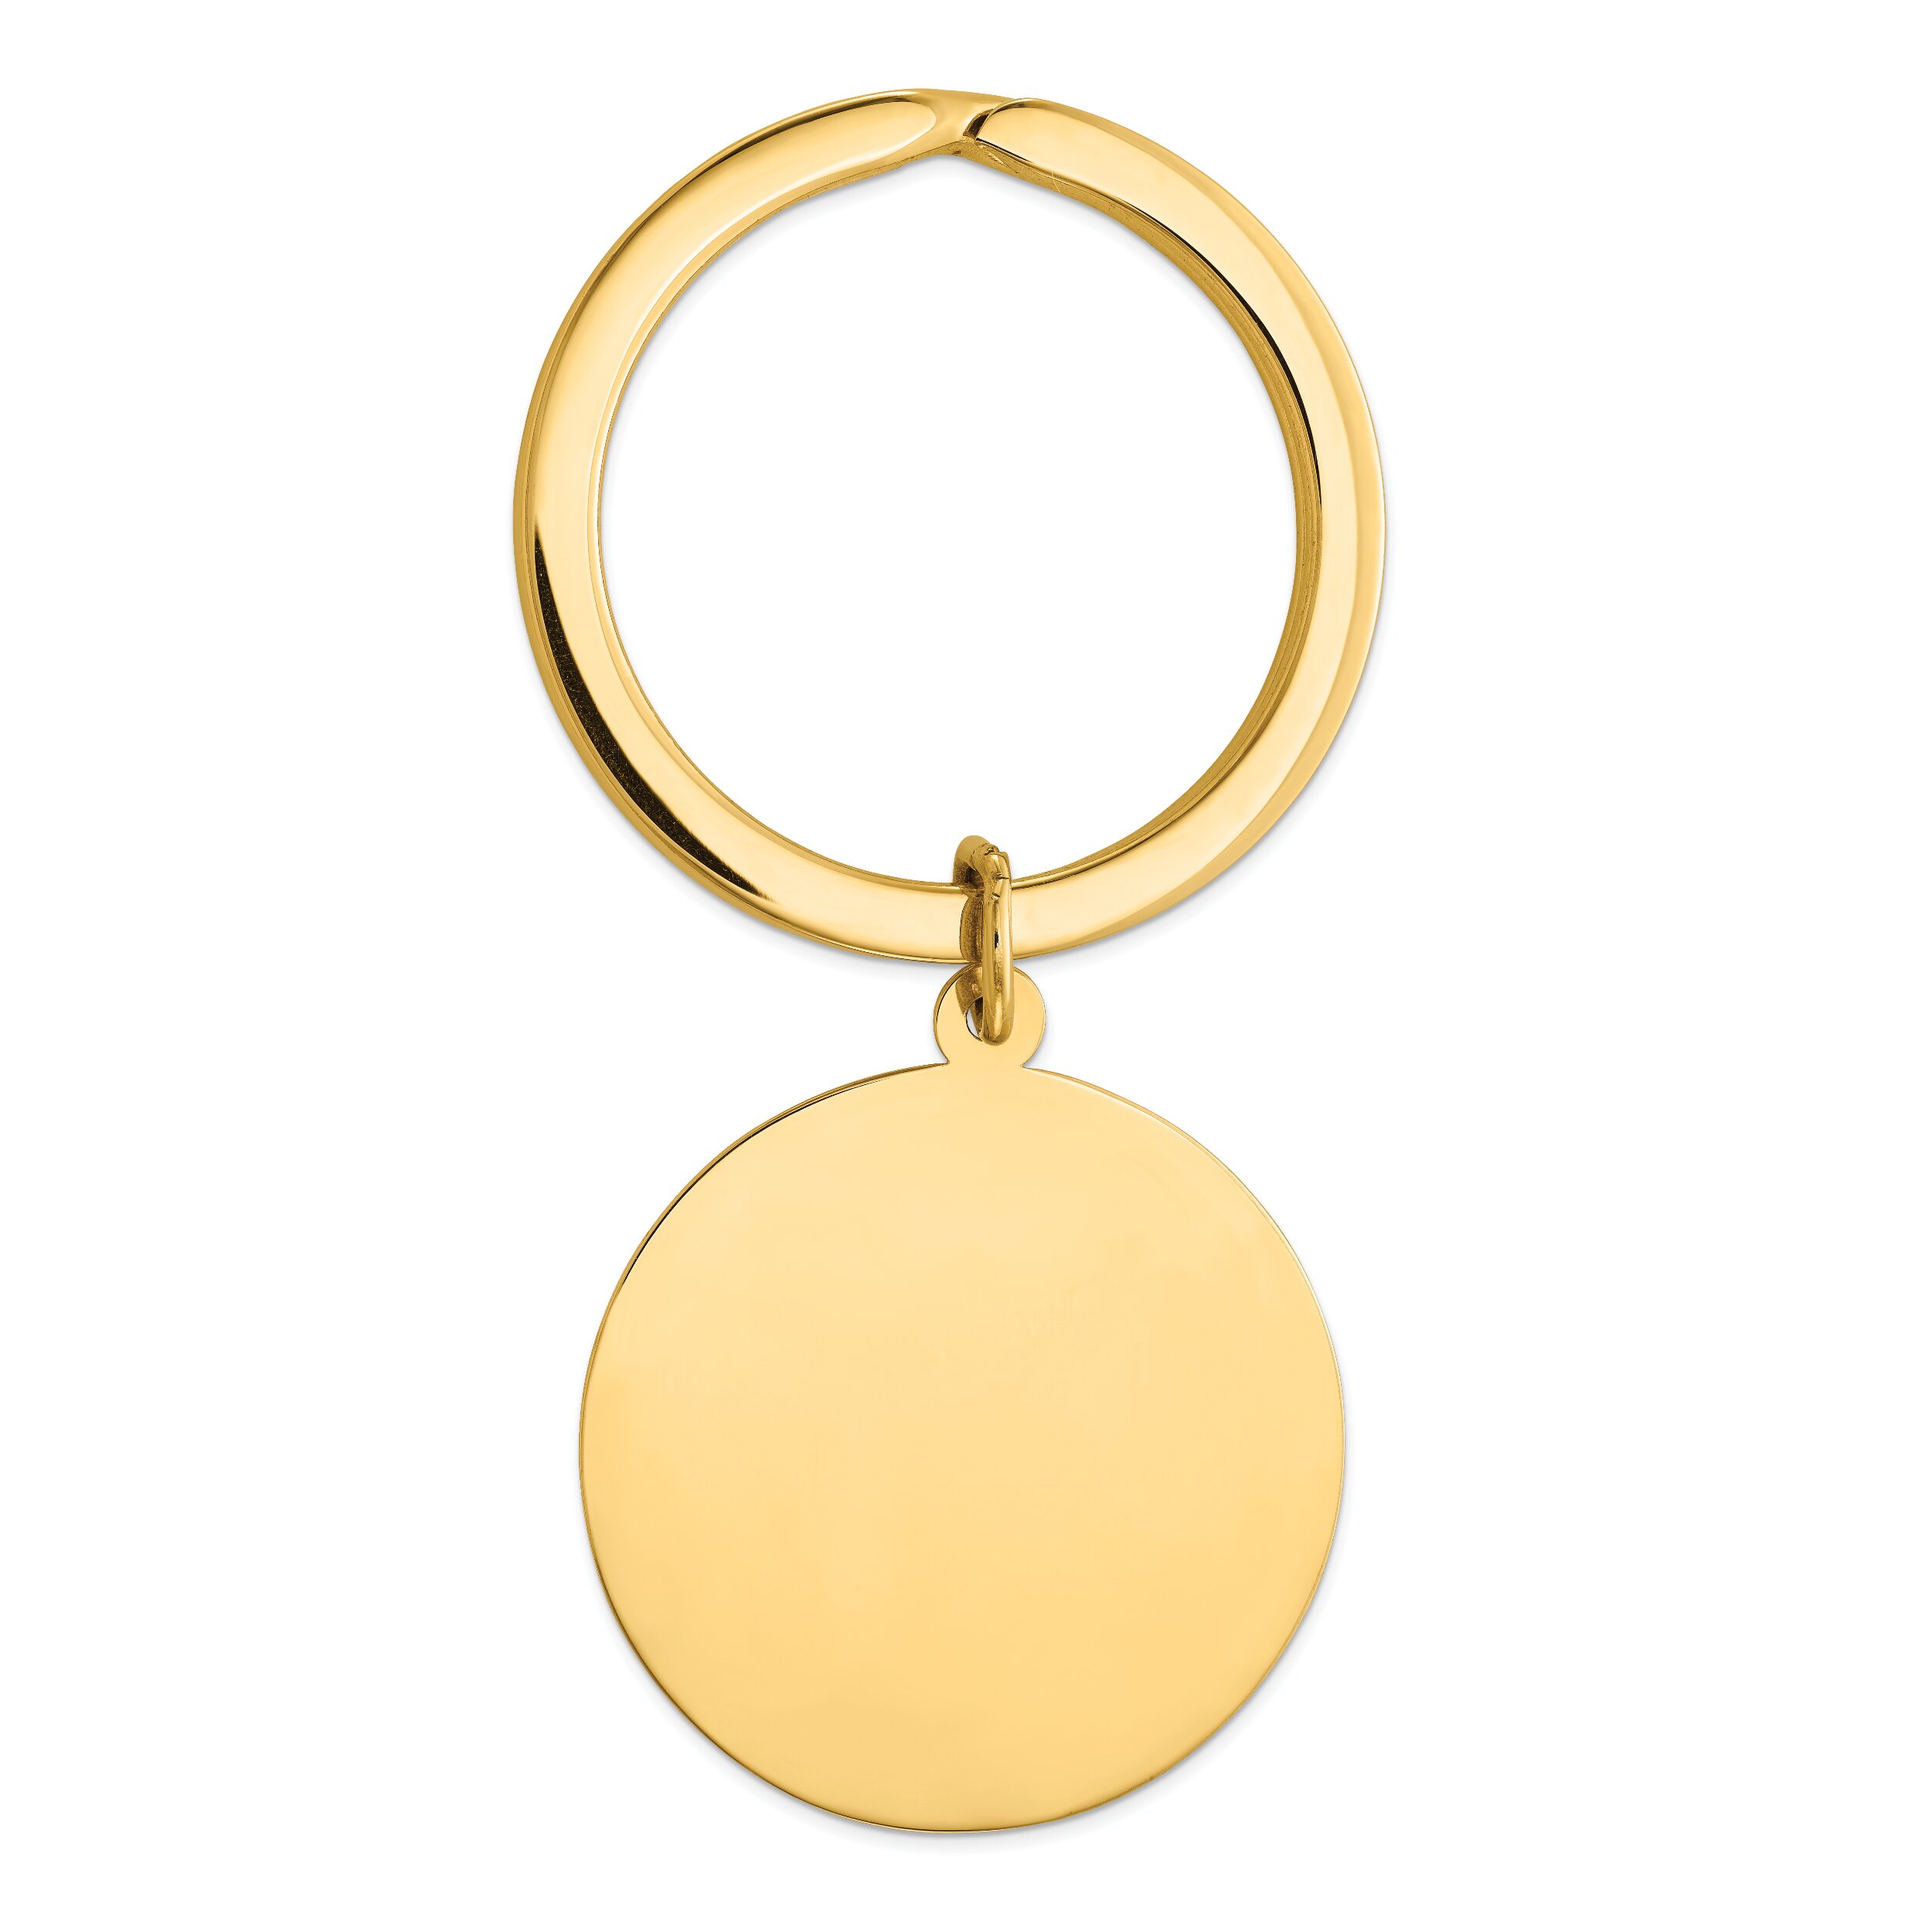 Findingking 14K Yellow Gold Engravable Round Disc Key Ring